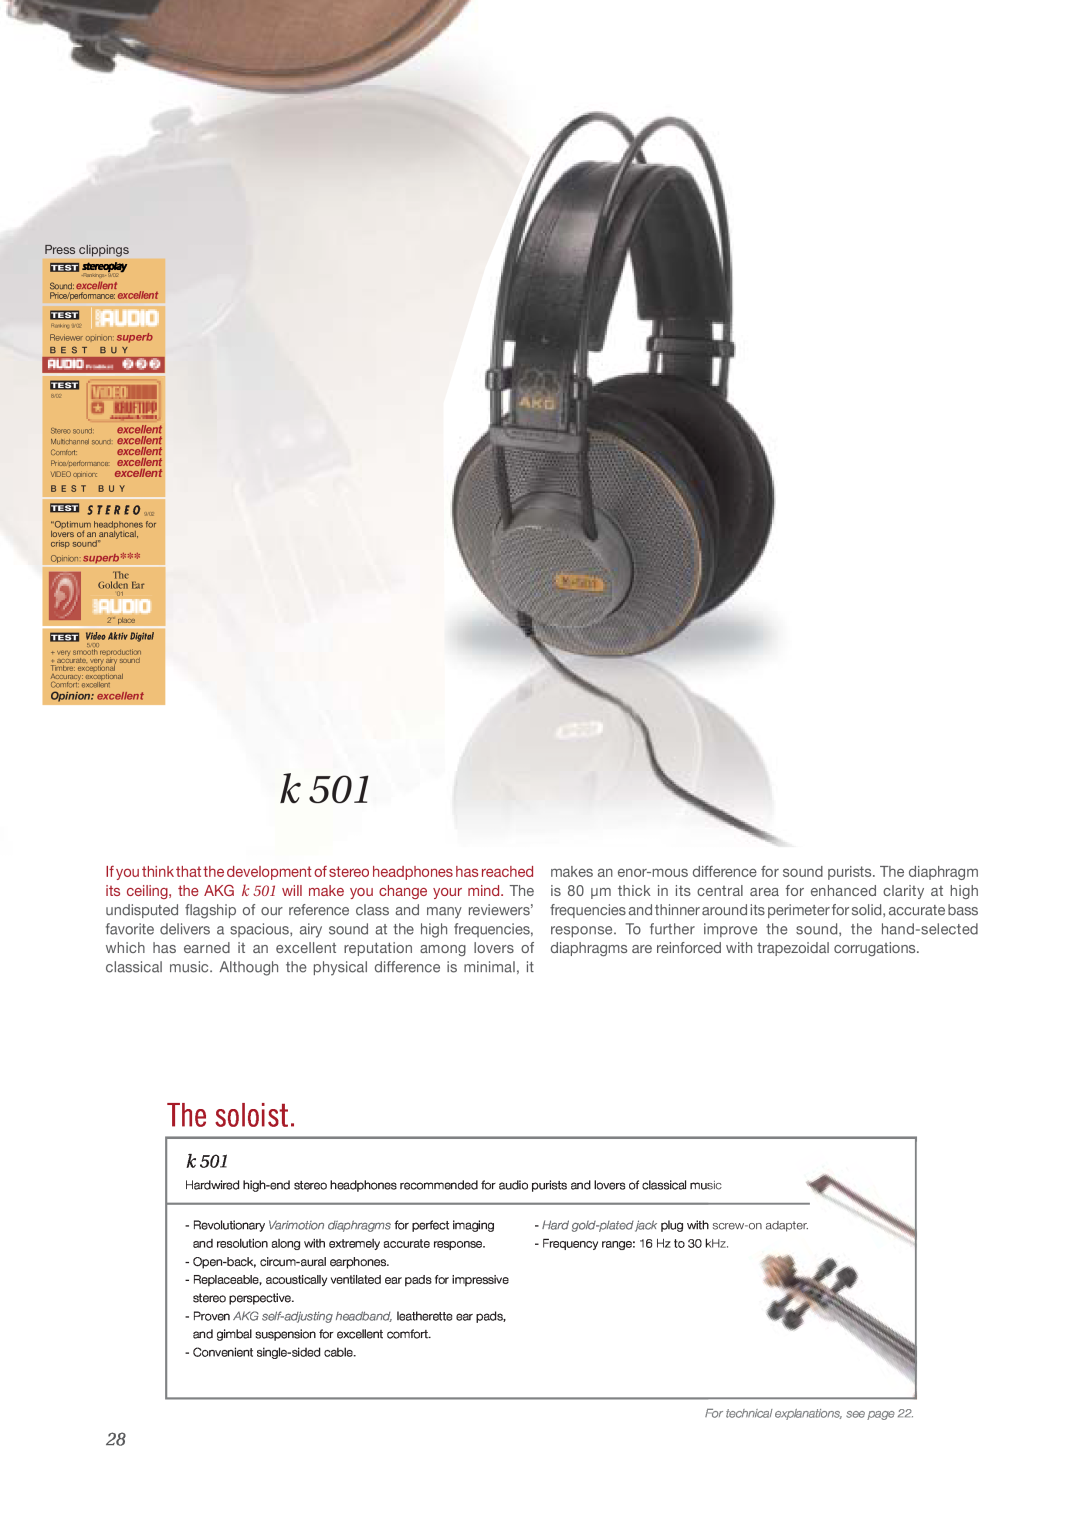 AKG Acoustics surround headphones The soloist, For technical explanations, see page, Sound excellent, The Golden Ear, Test 